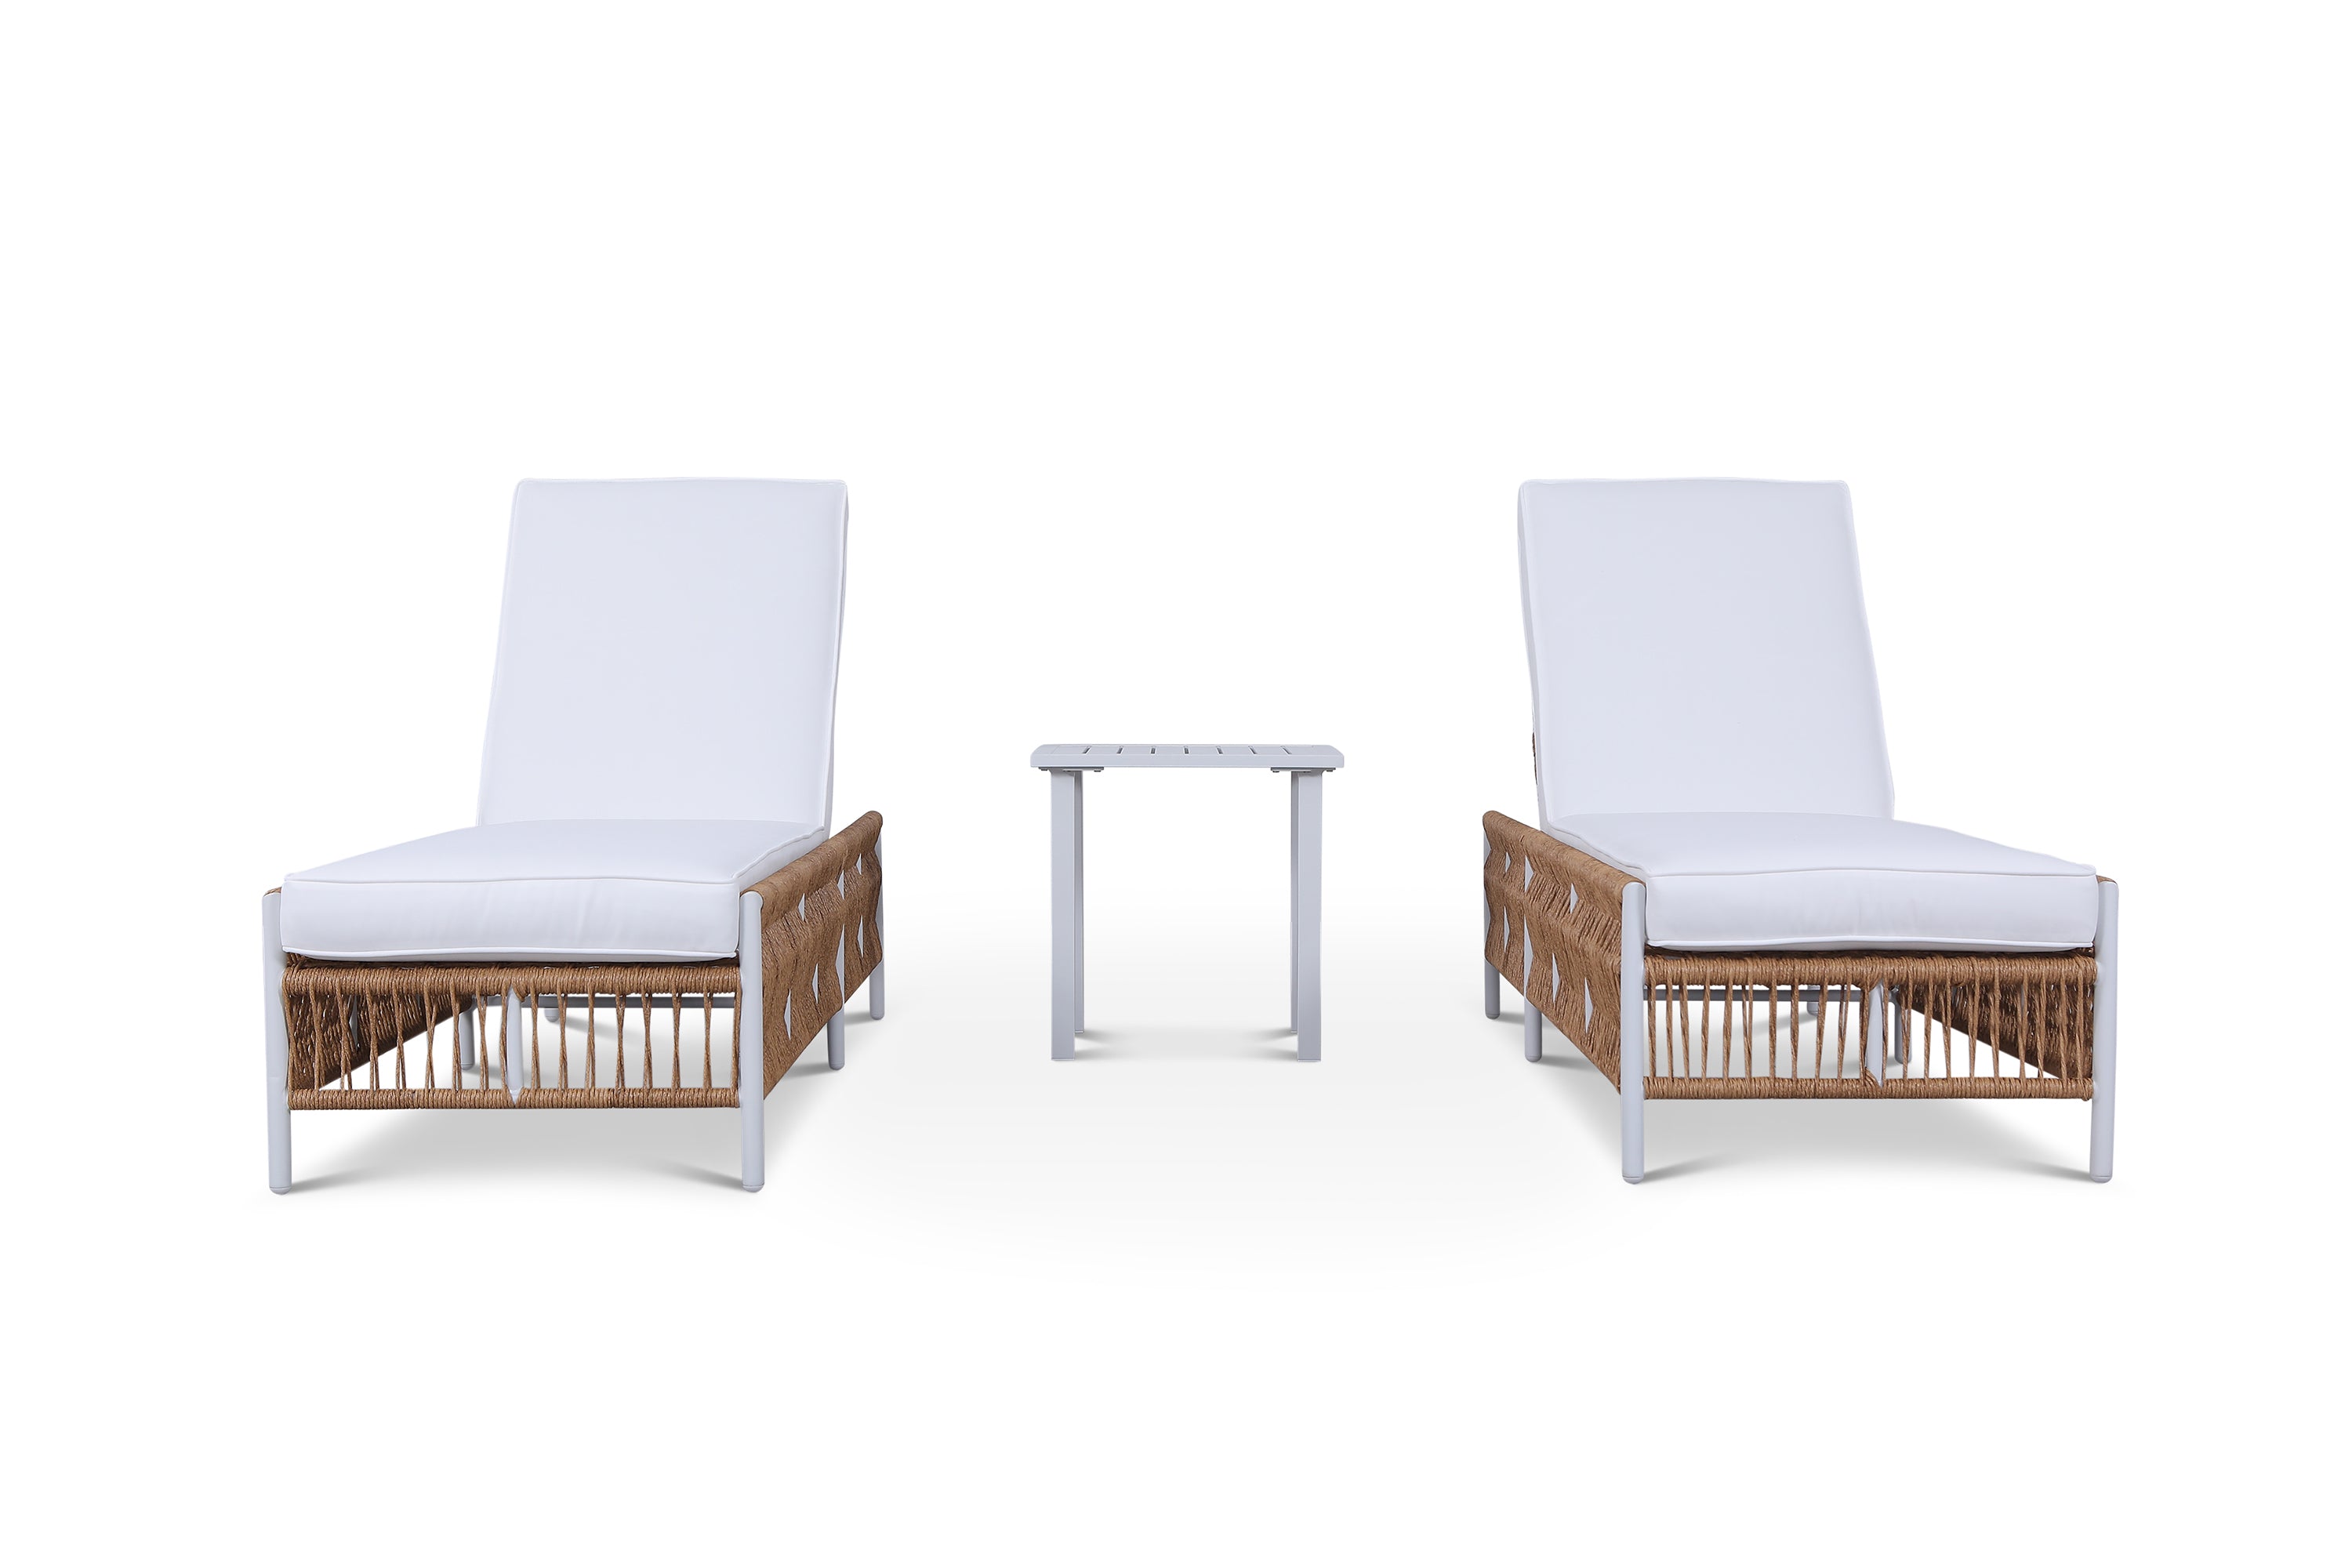 Olivia Ivory 3 Piece Set of Wicker Chaise Lounges with End Table